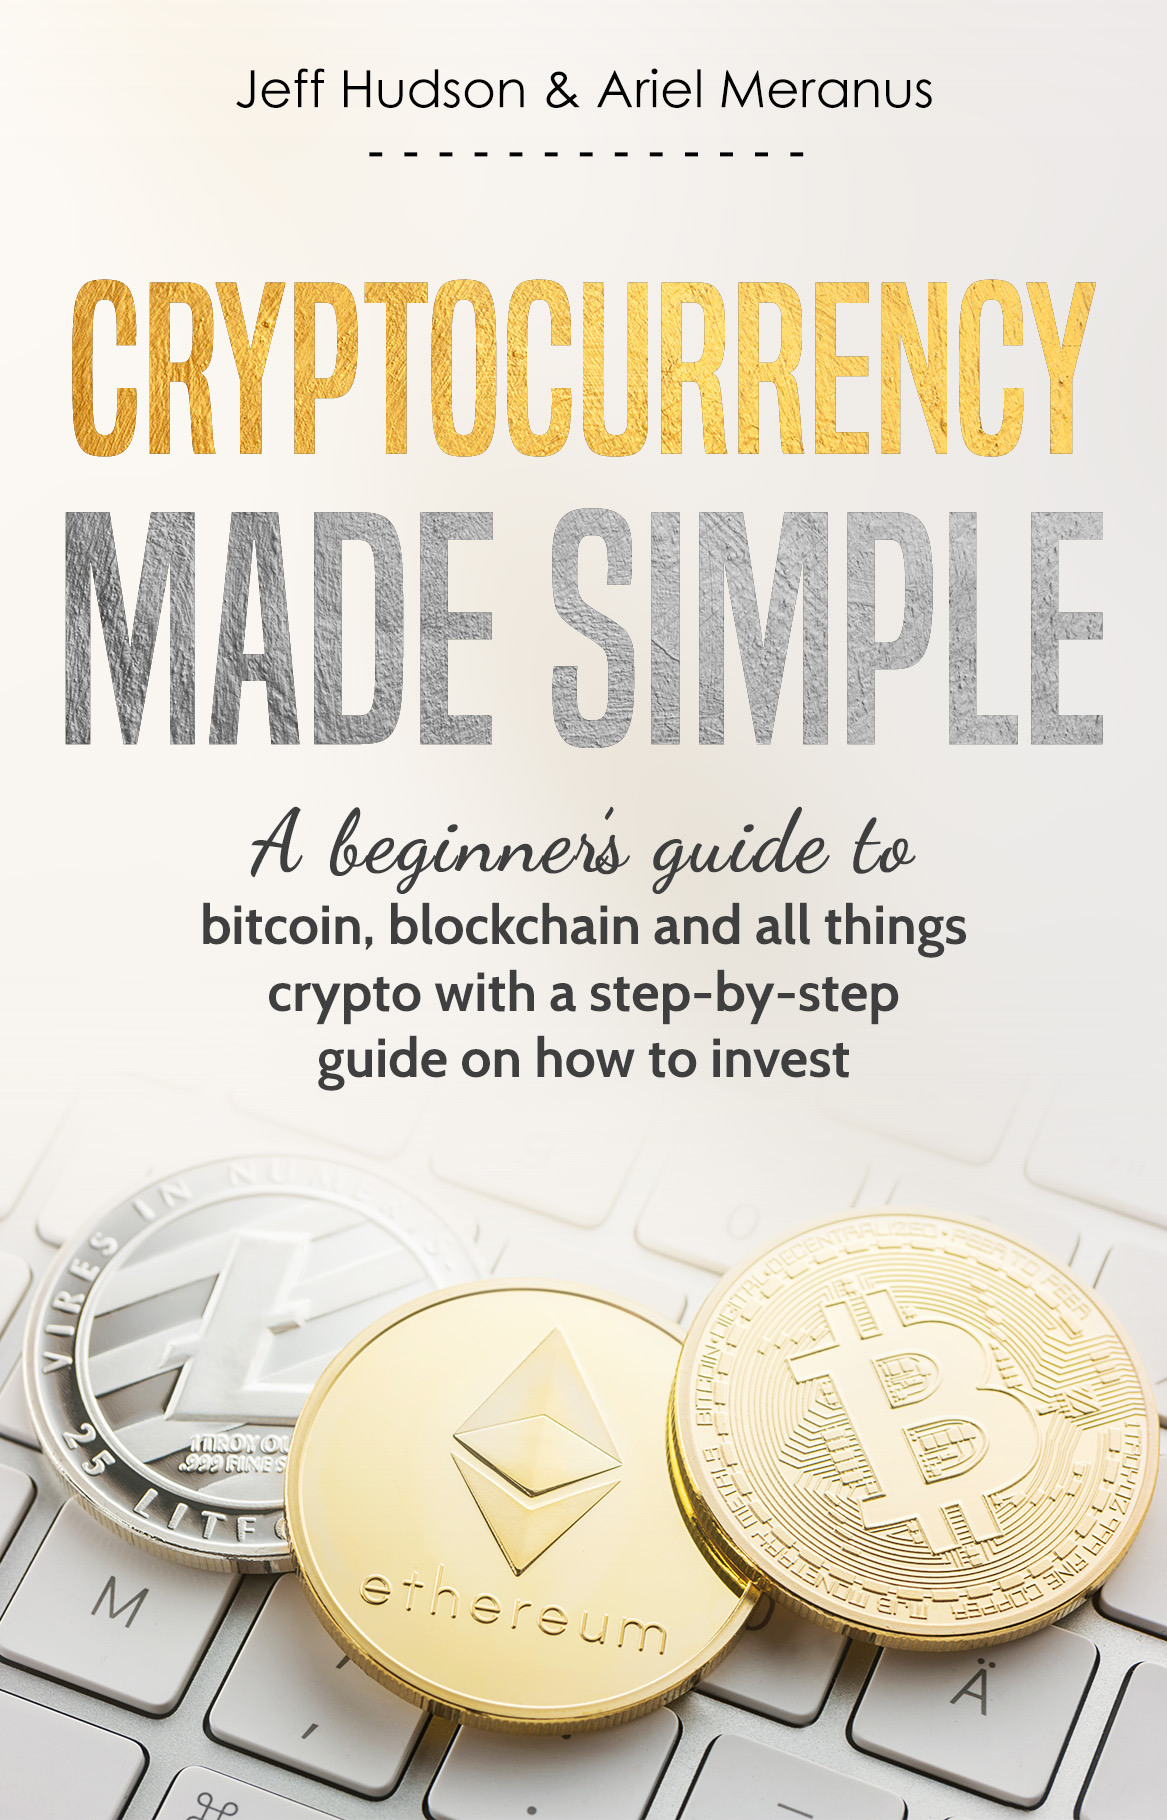 FREE: Cryptocurrency Made Simple: A beginner’s guide to bitcoin, blockchain and all things crypto with a step-by-step guide on how to invest by Ariel Meranus